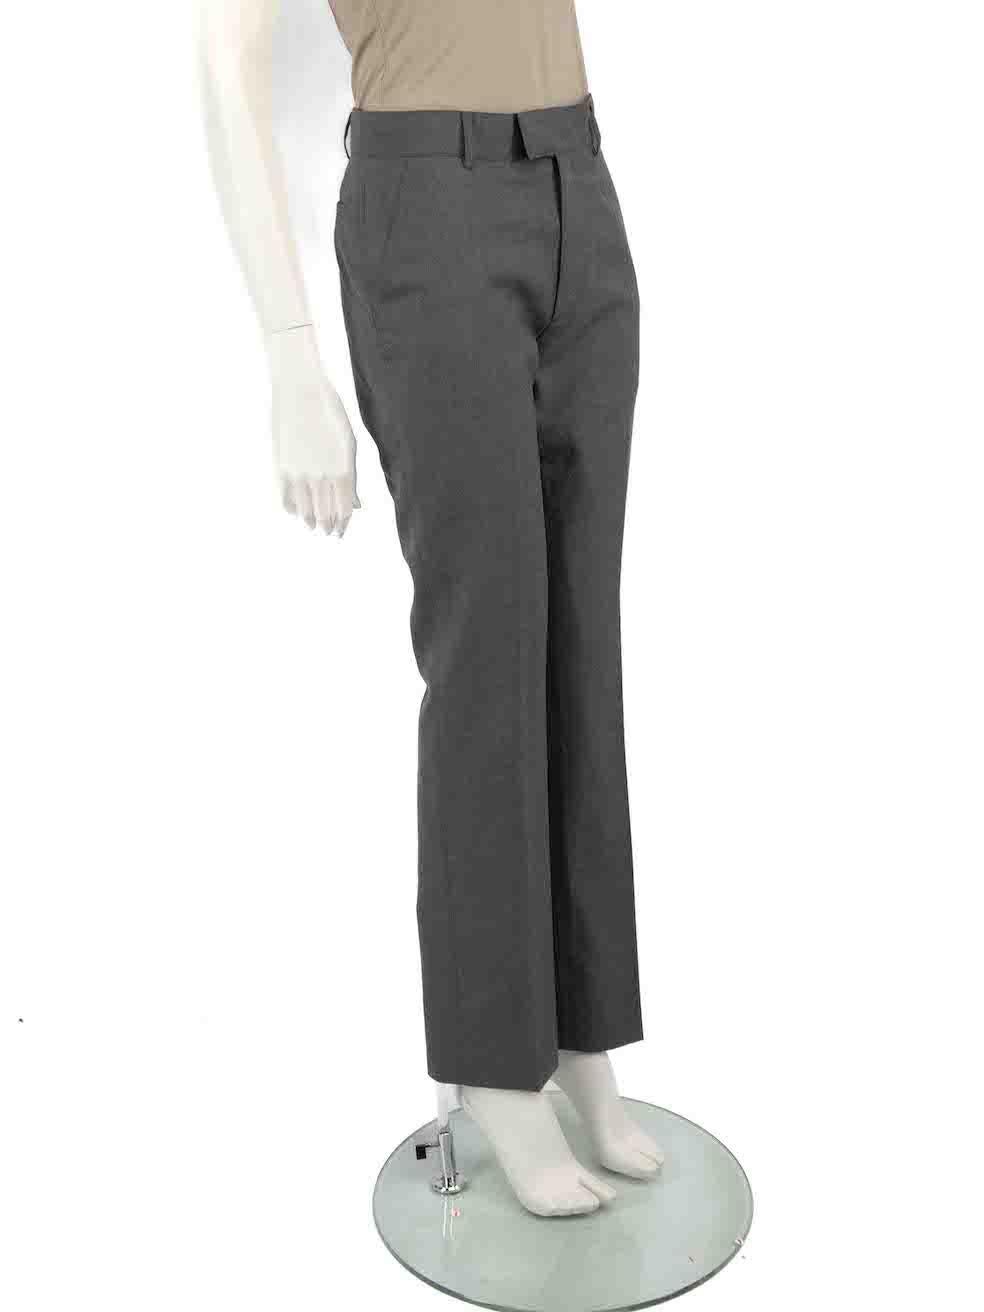 CONDITION is Very good. Hardly any visible wear to trousers is evident on this used A.P.C. designer resale item.
 
 Details
 Grey
 Wool
 Trousers
 Straight leg
 Mid rise
 2x Side pockets
 2x Back pockets
 Fly zip, hook and button fastening
 
 
 Made